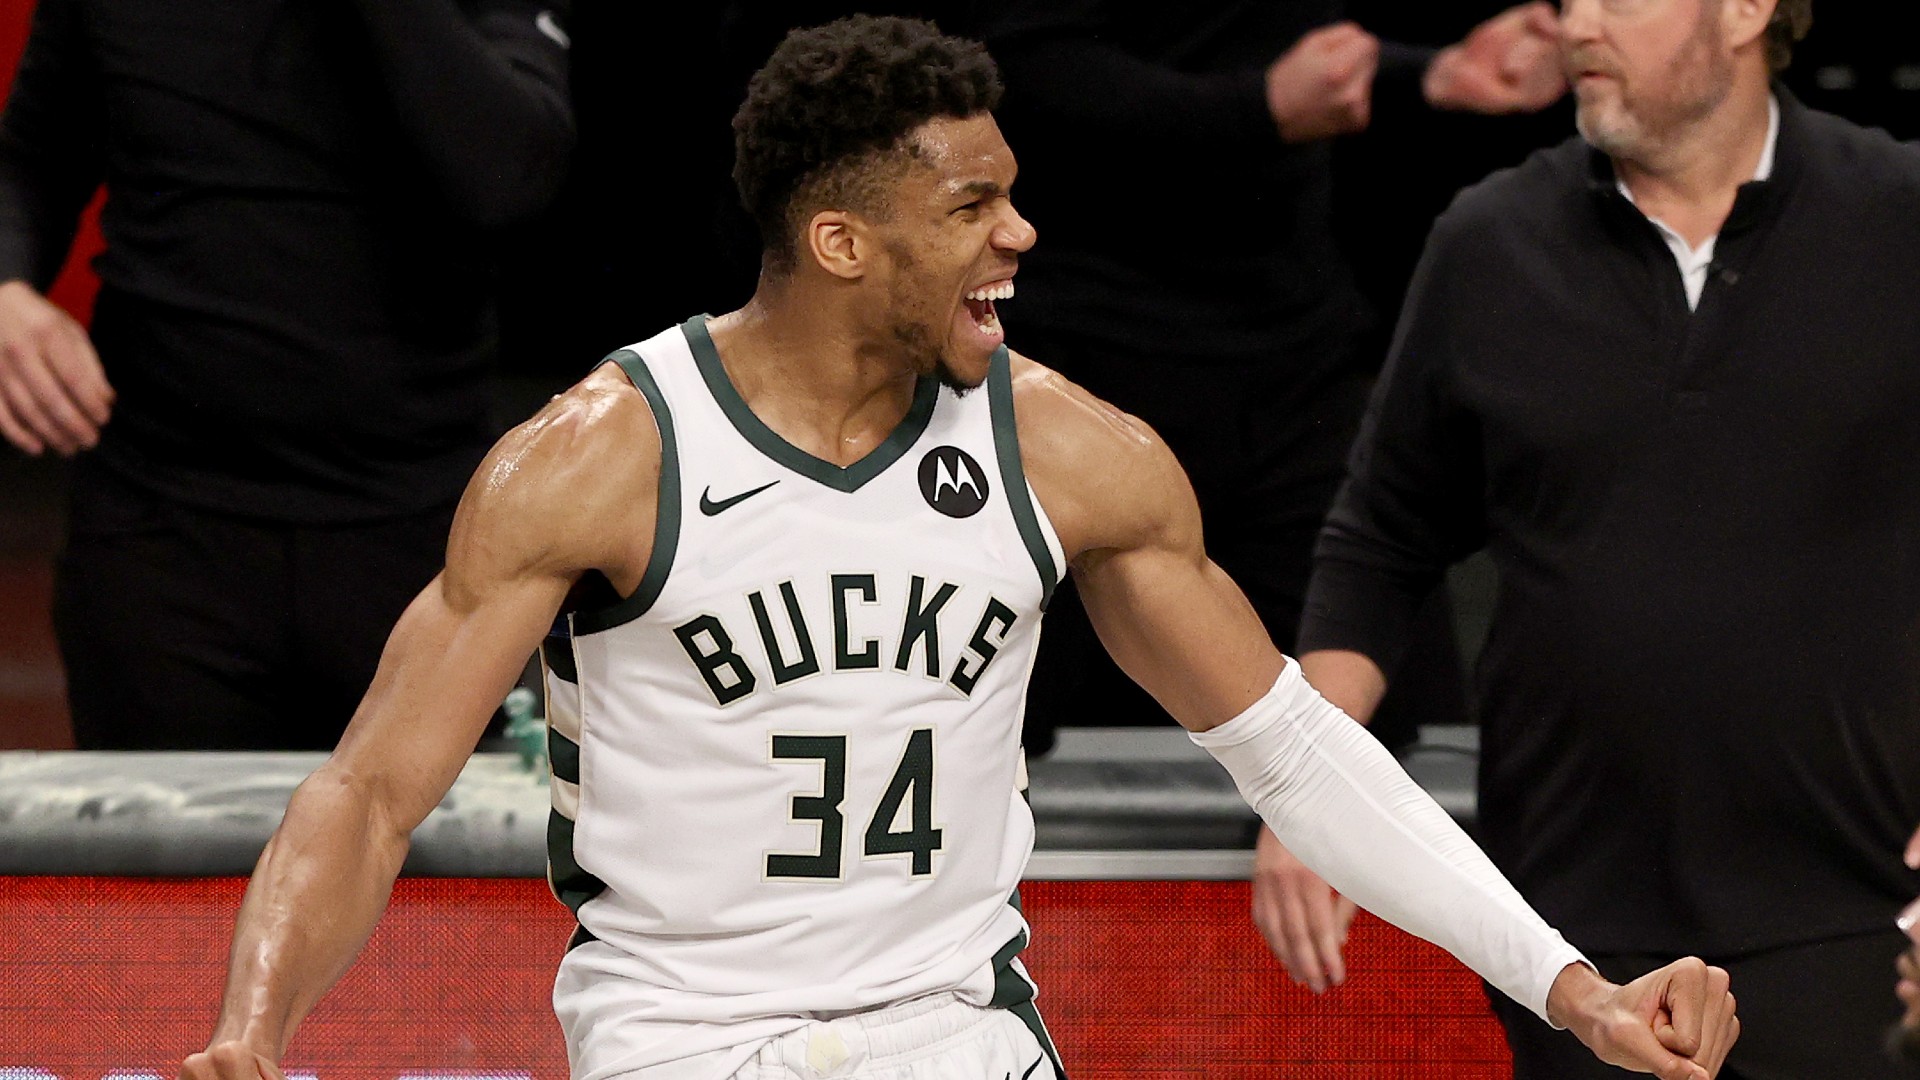 Nba Playoffs 2021 Monster Performance From Giannis Antetokounmpo Lifts Milwaukee To Game 7 Win In Overtime Nba Com Canada The Official Site Of The Nba